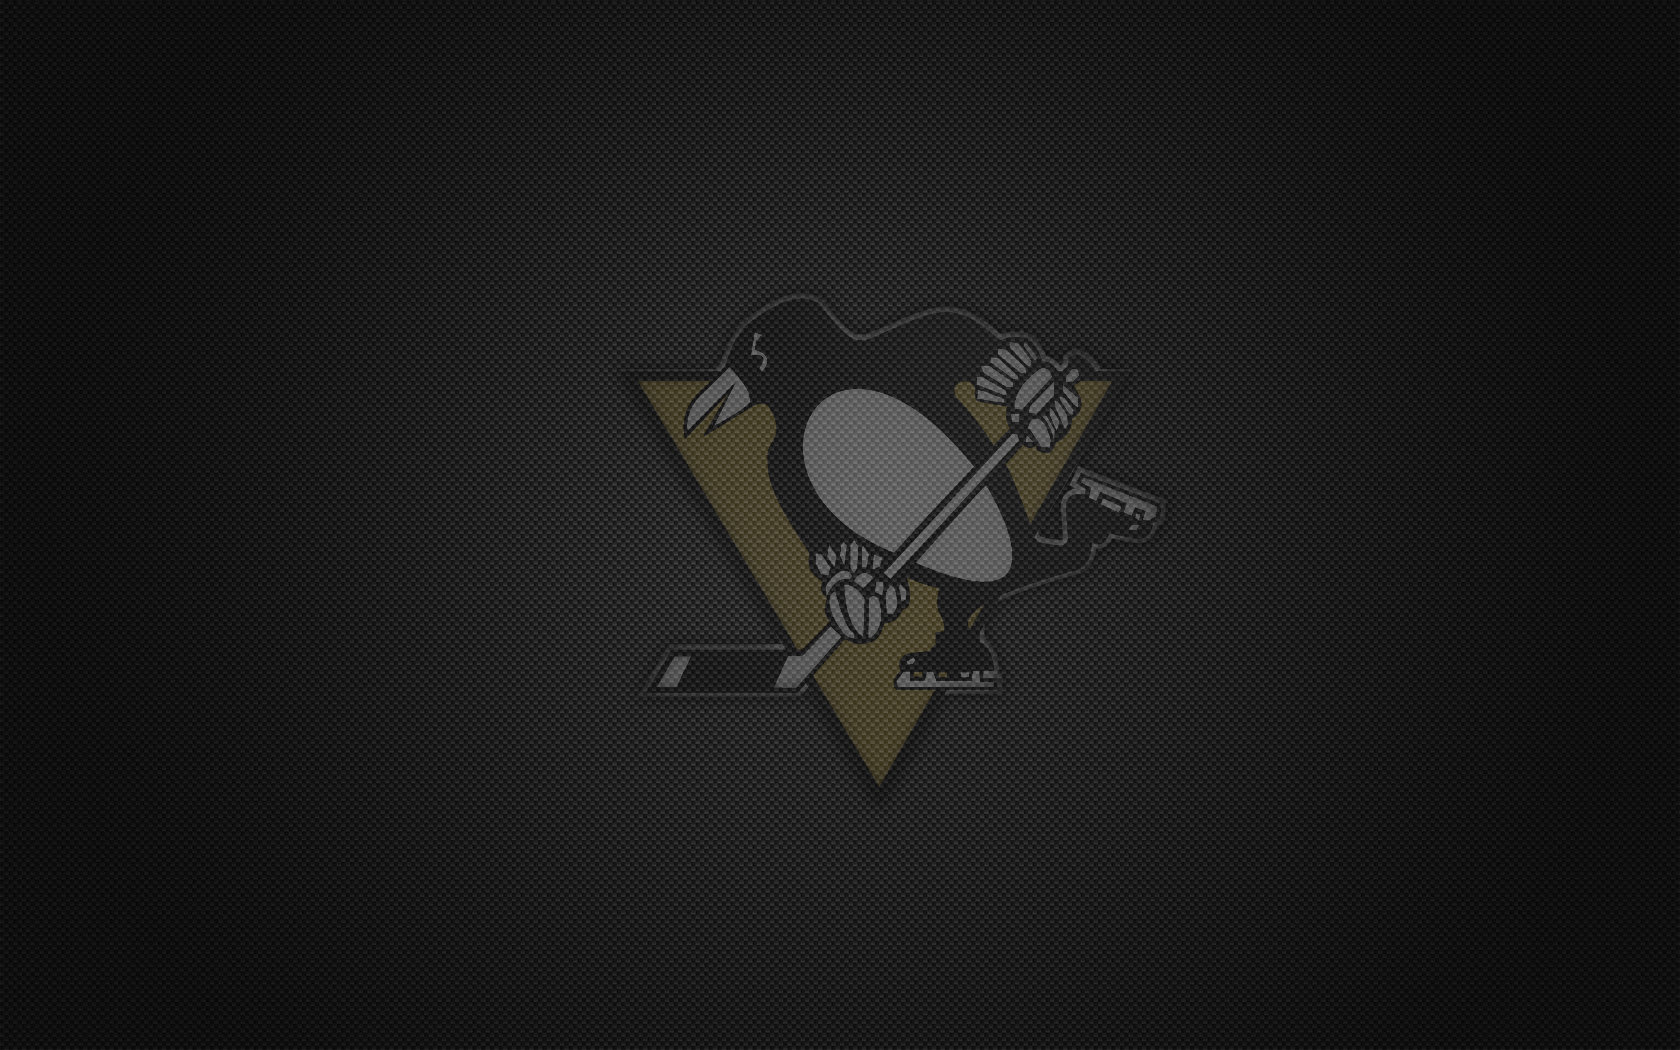 Enjoy our wallpaper of the week Pittsburgh Penguins